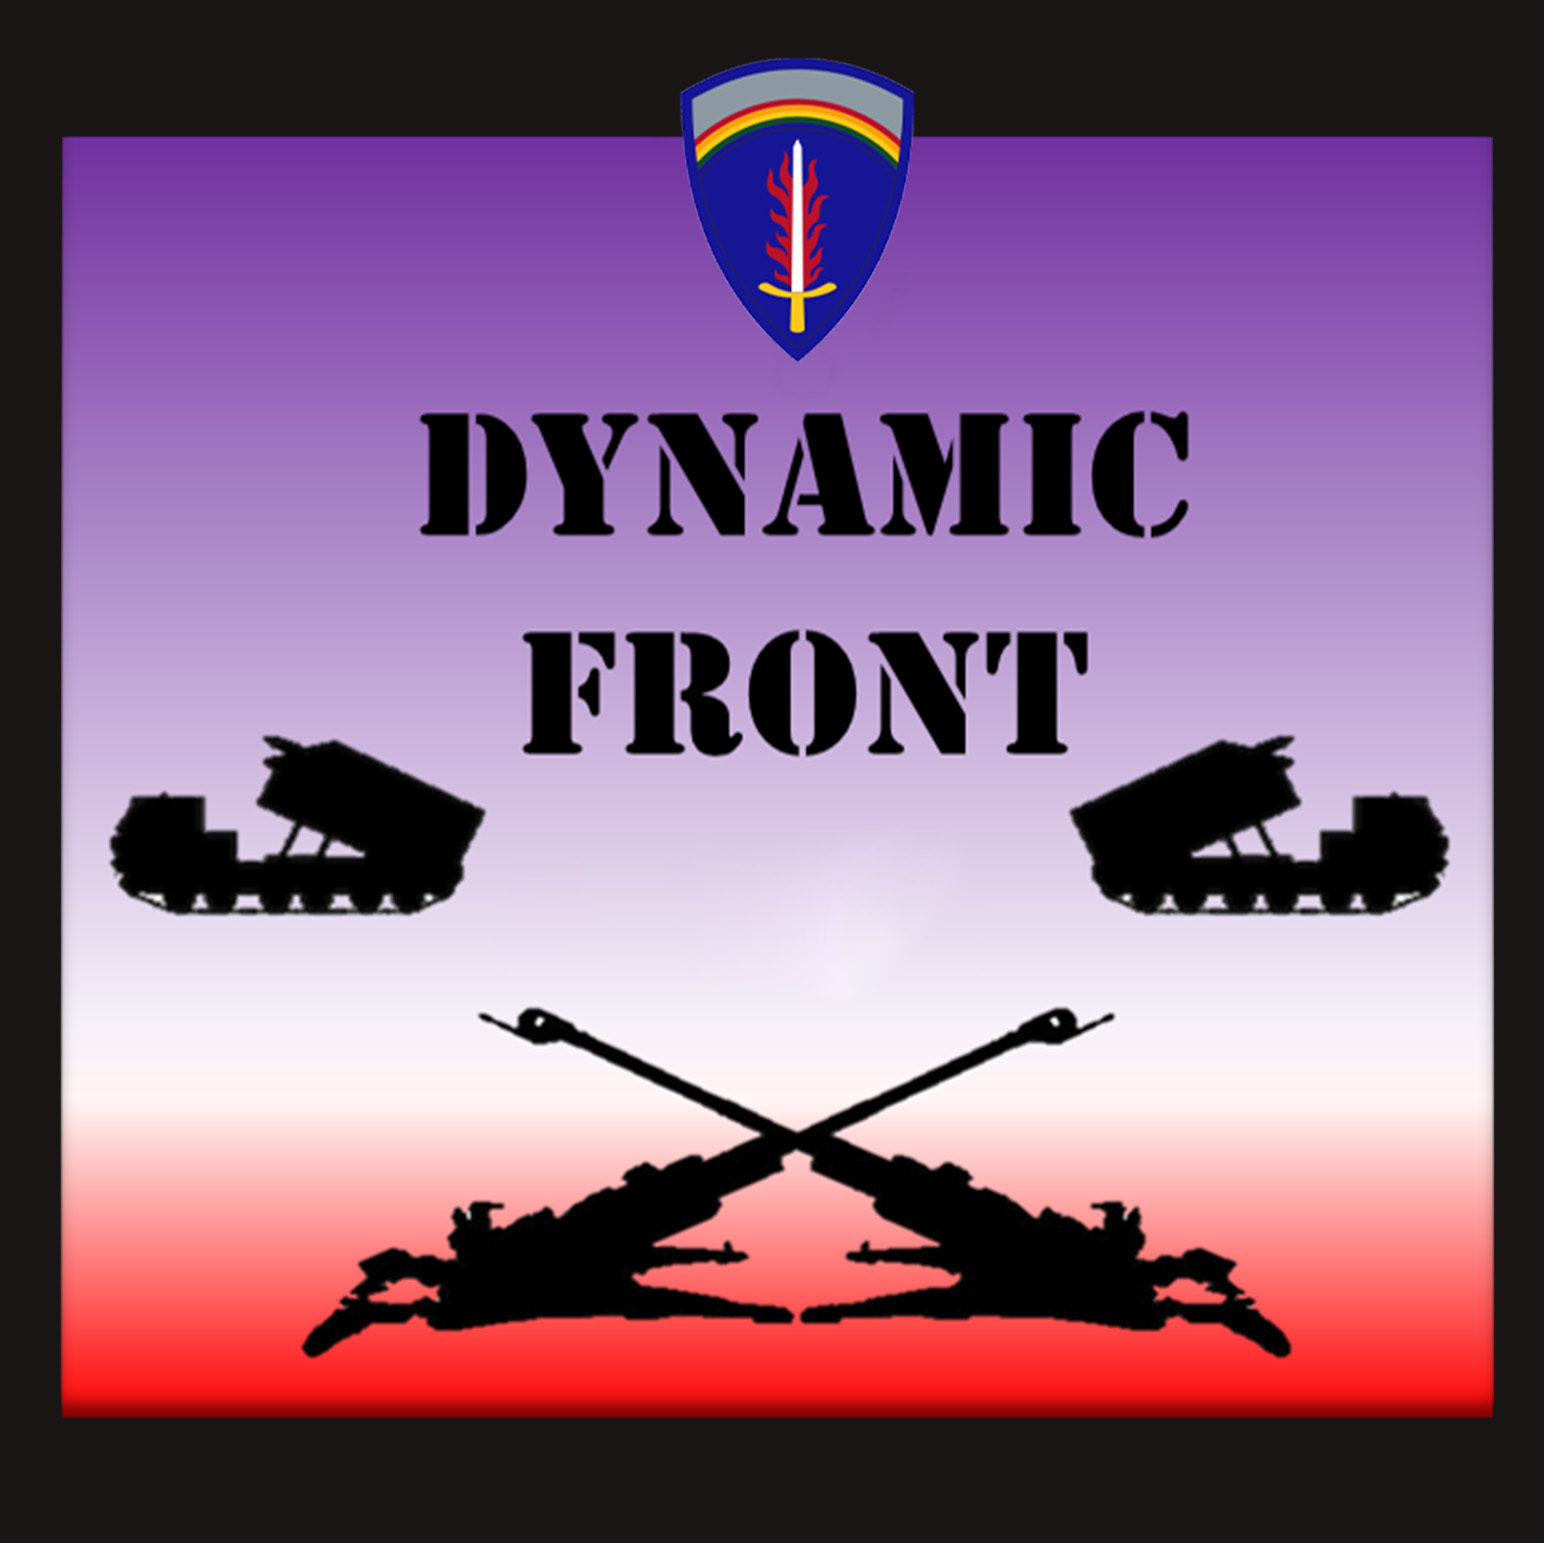 Press Release - Exercise Announcement for Dynamic Front 23 > U.S.